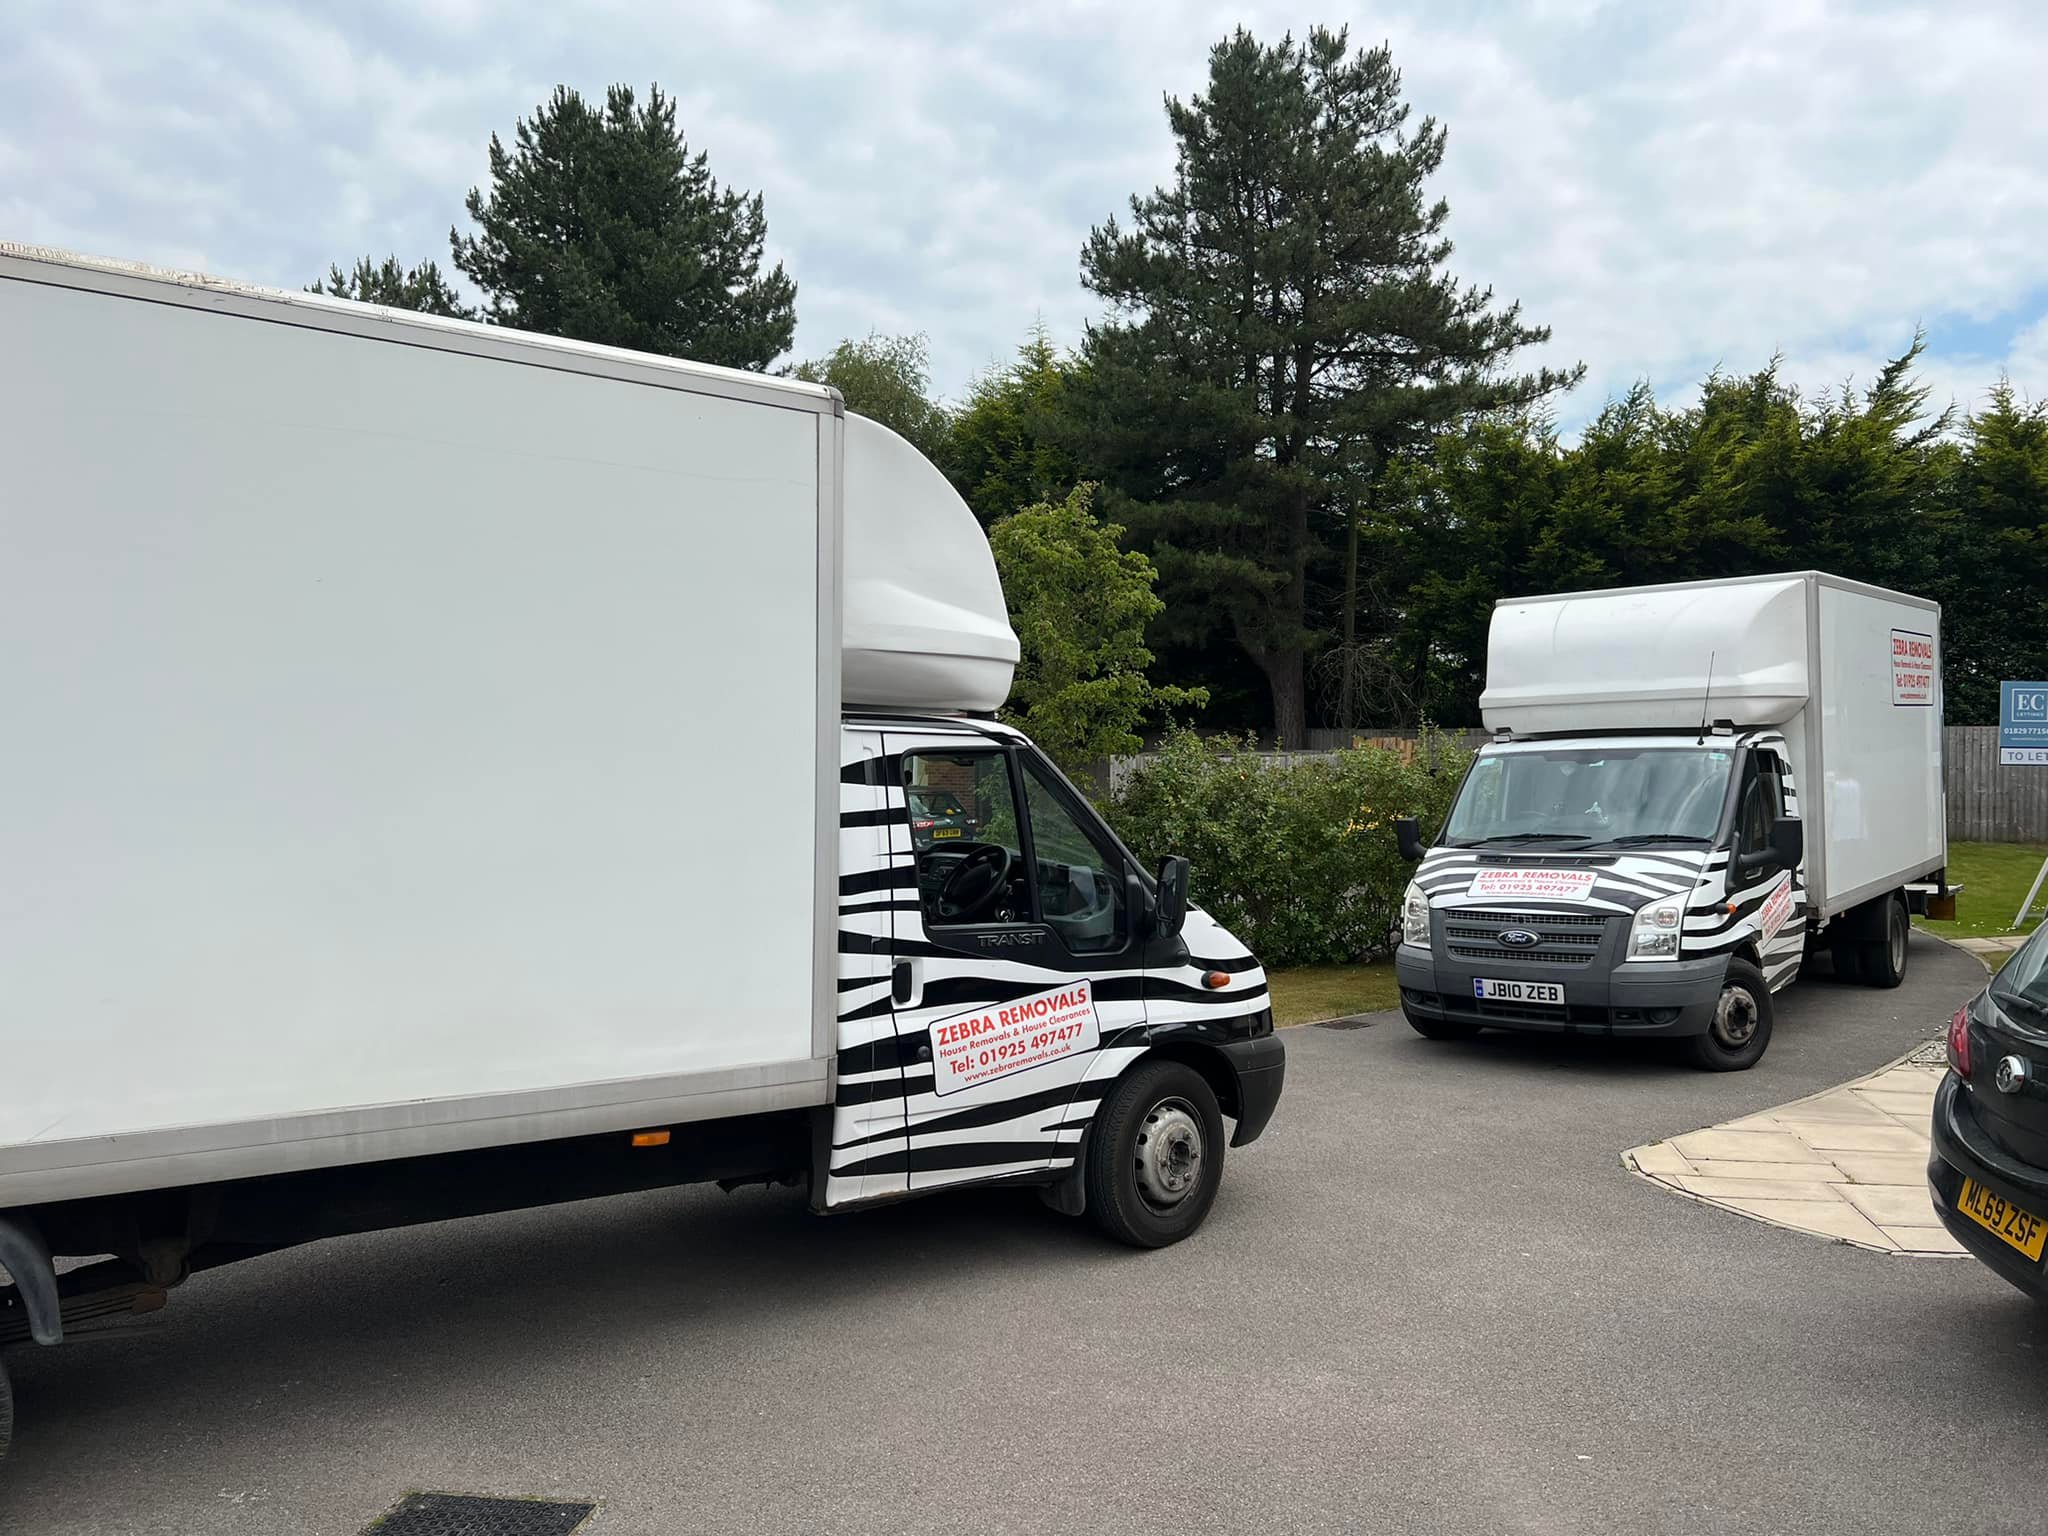 Two large vans from Zebra Removals